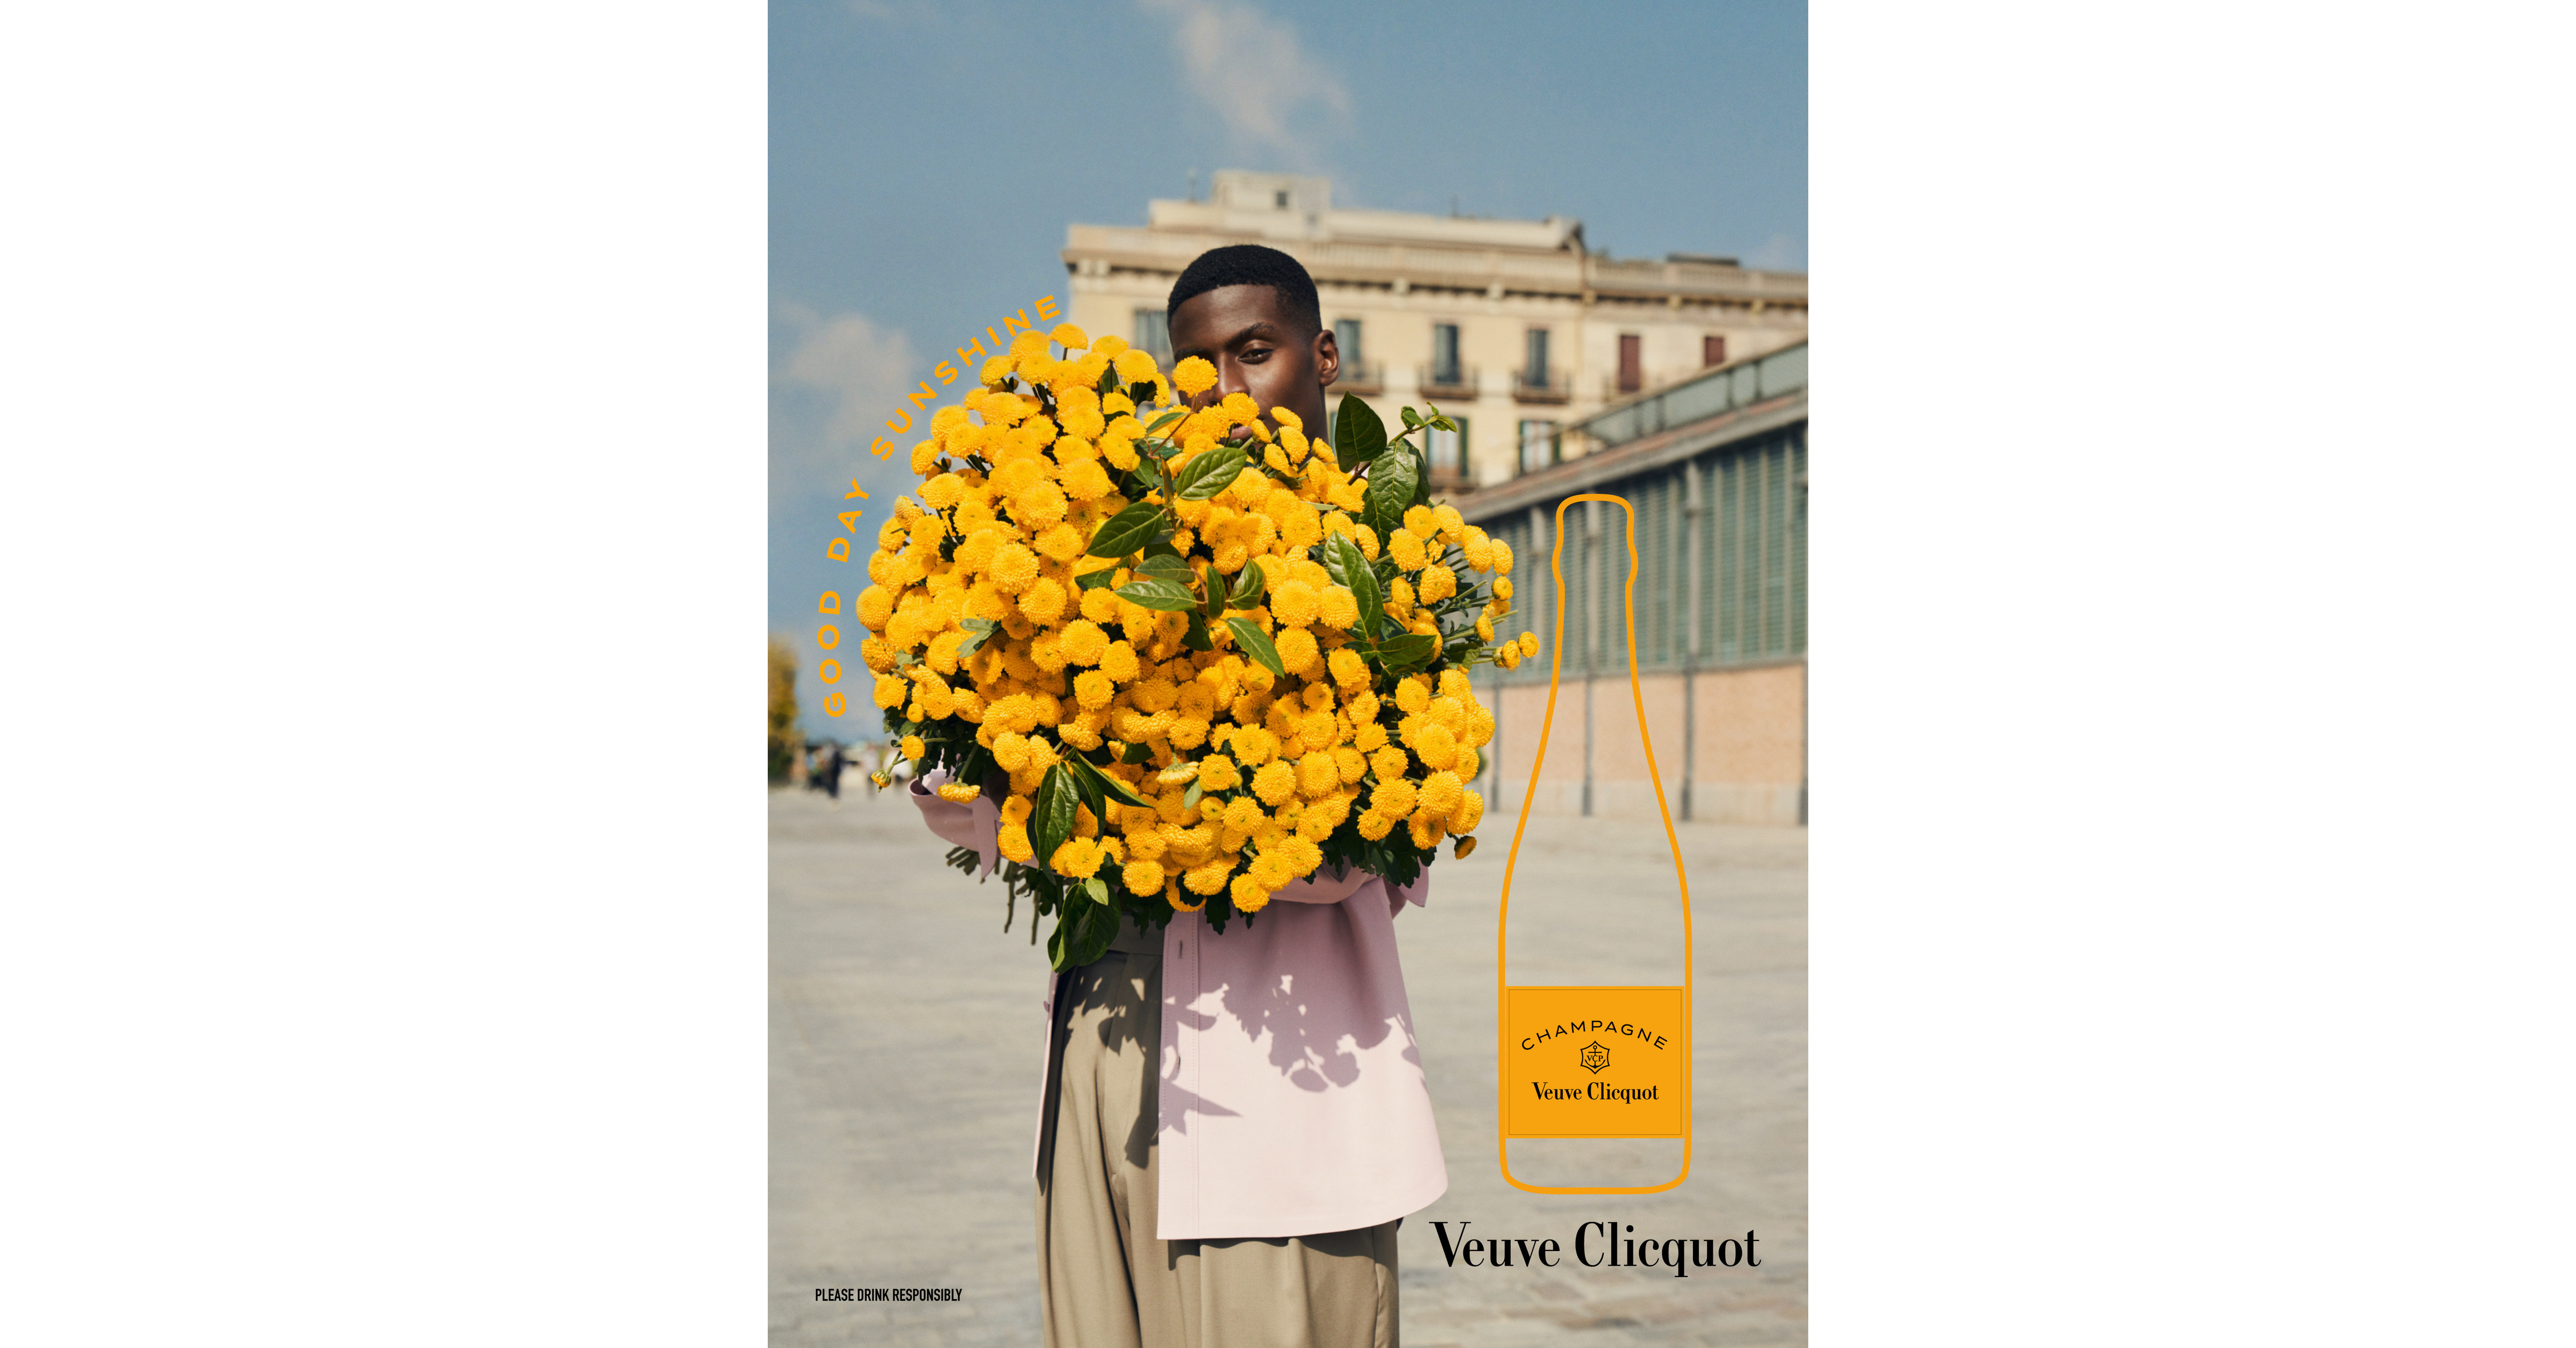 Veuve Clicquot is turning 250 – and Clos19 has the champagne to